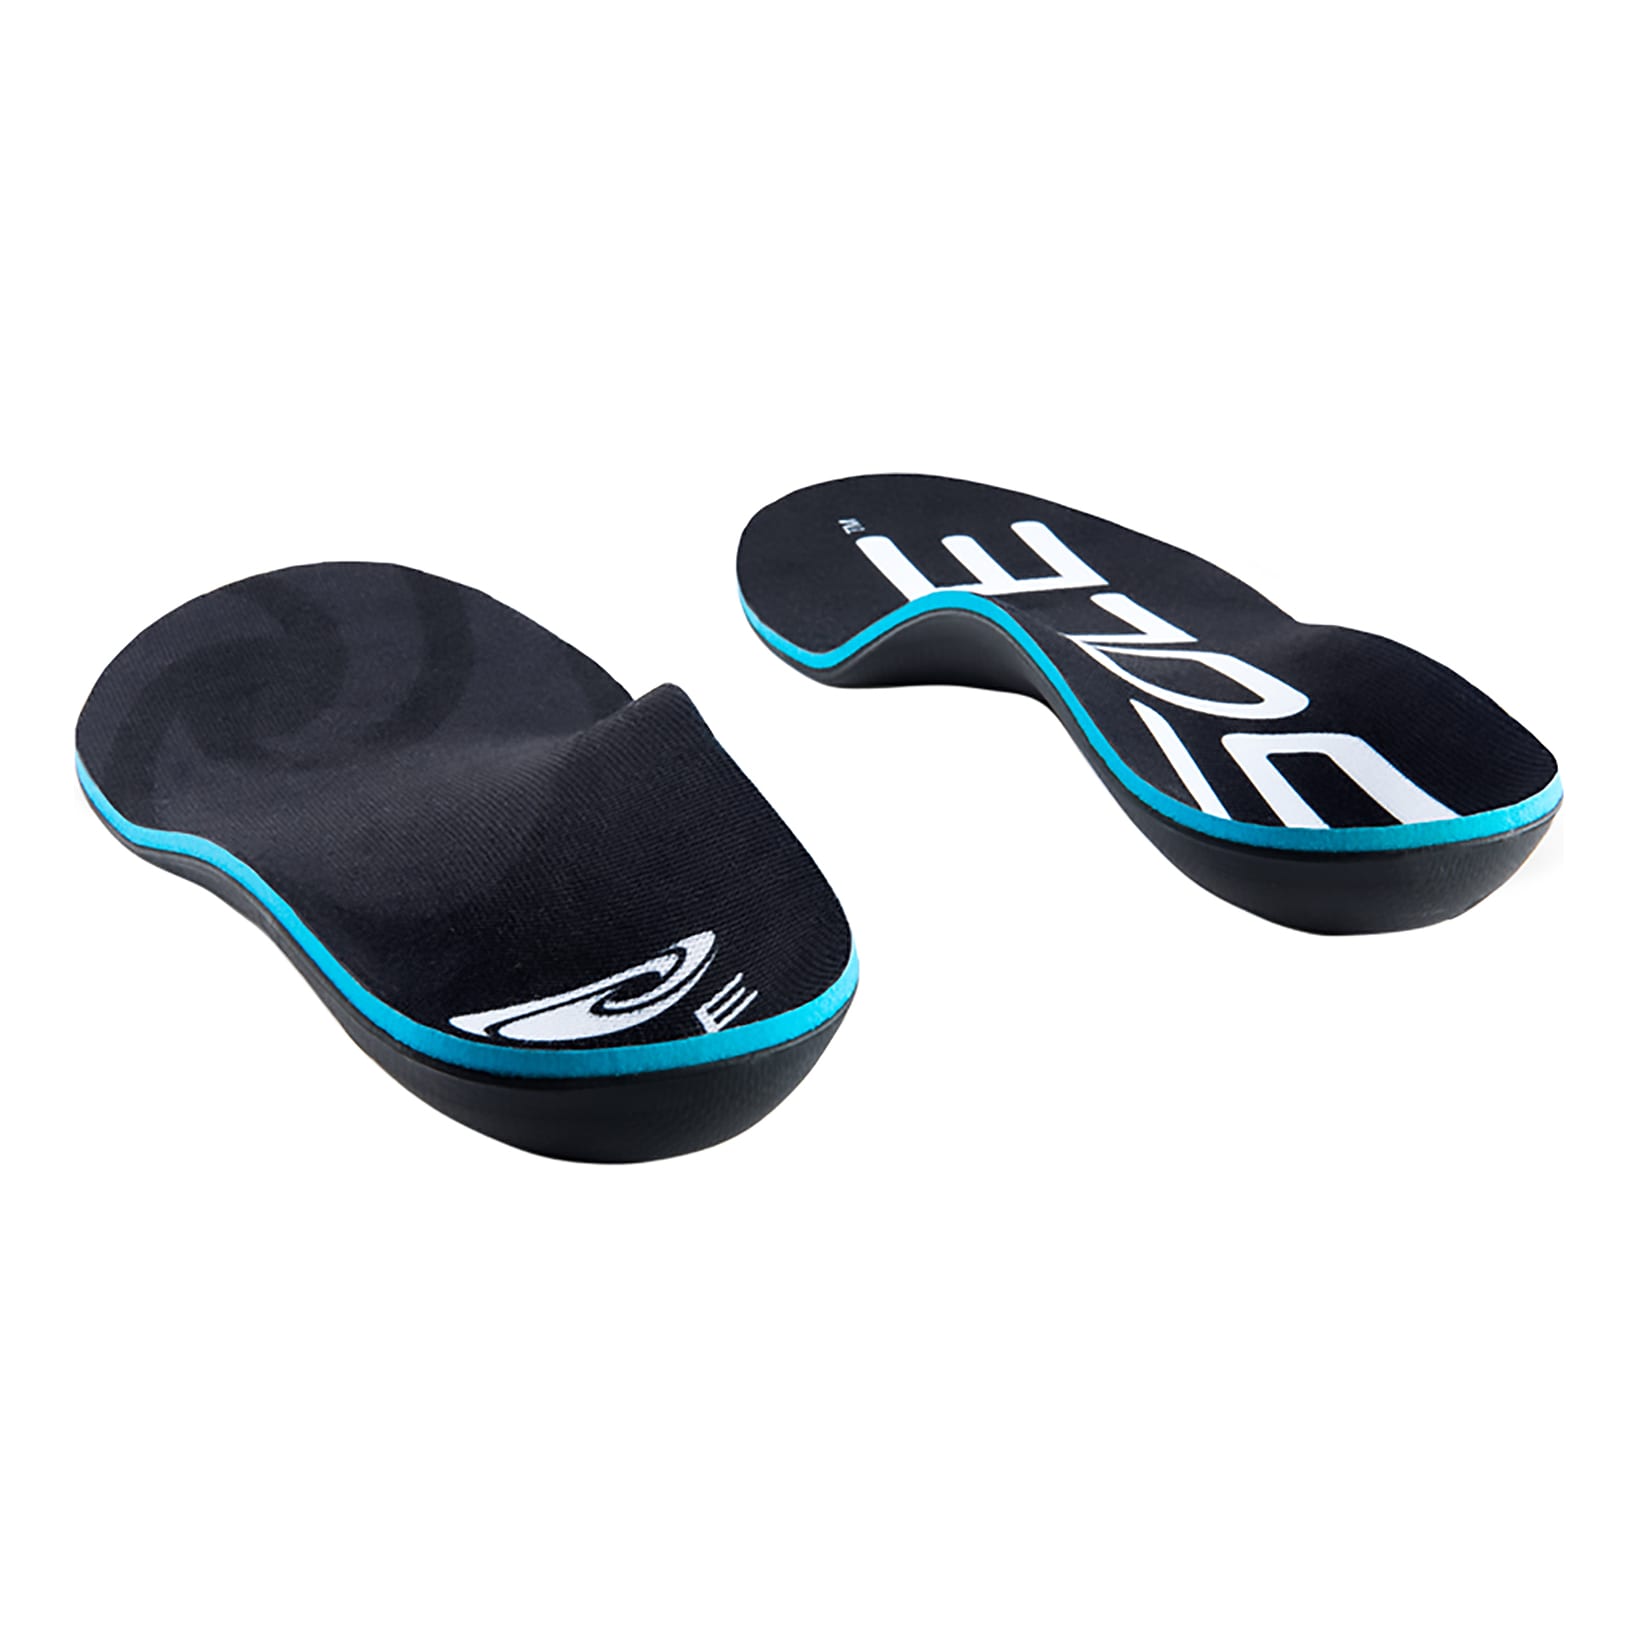 SOLE Active Thick Mouldable Insole - pair